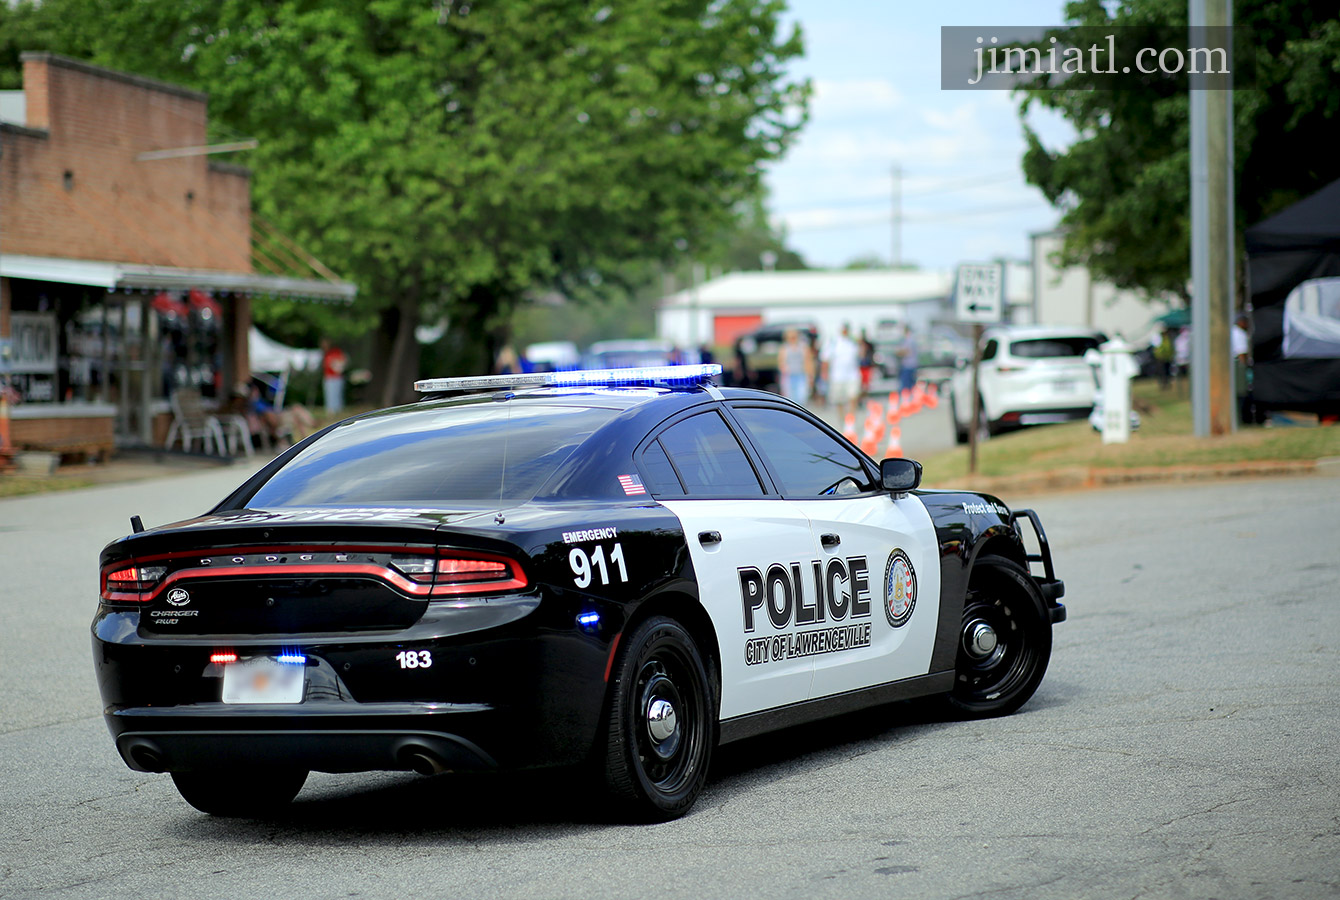 Lawrenceville police ensure safety at Show Your Ride For the Ribbons Car Show in Lawrenceville